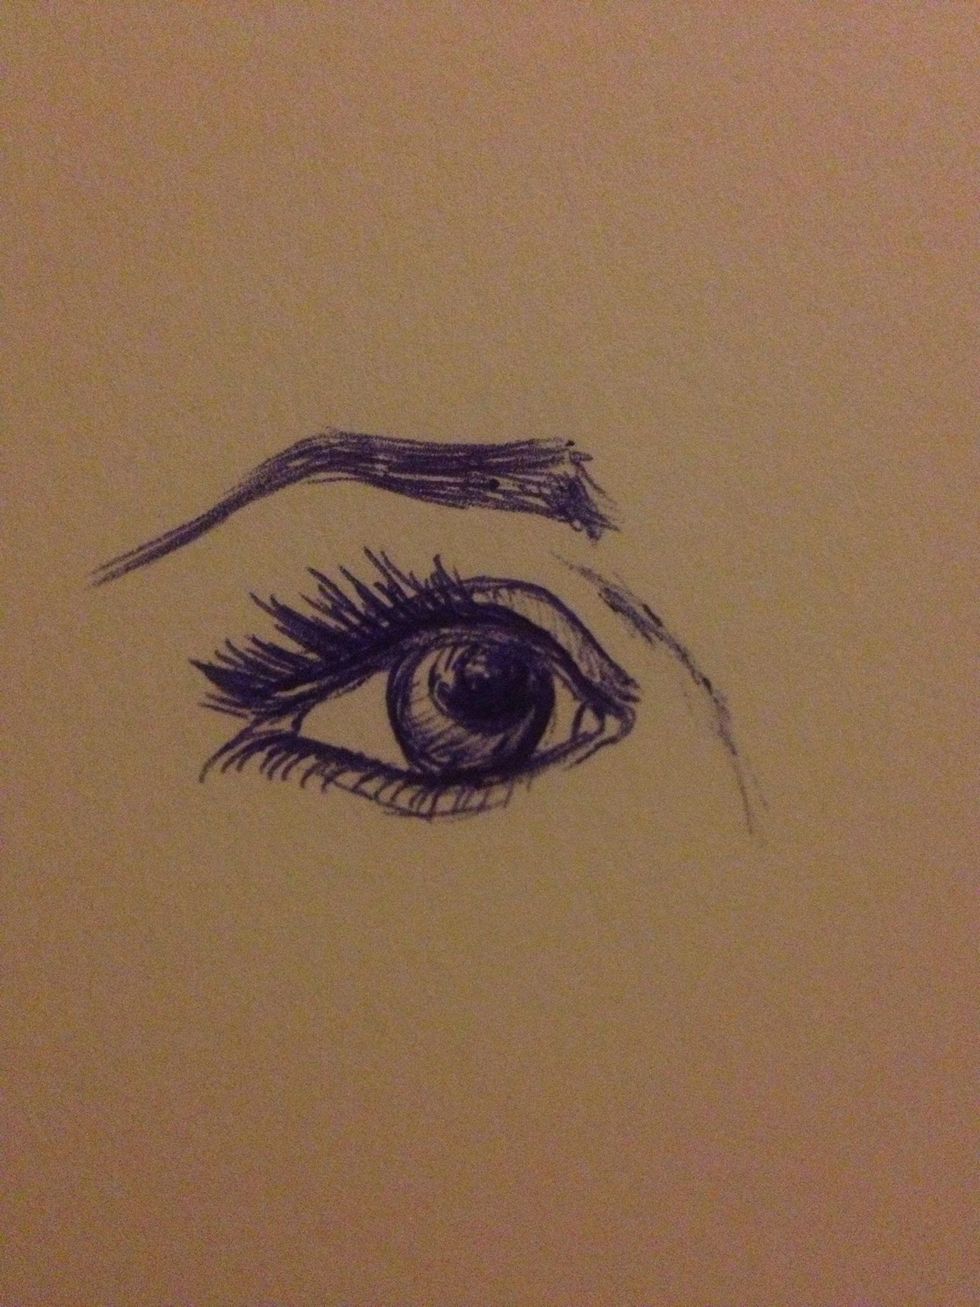 How to draw a realistic eye and eyebrow in pen - B+C Guides